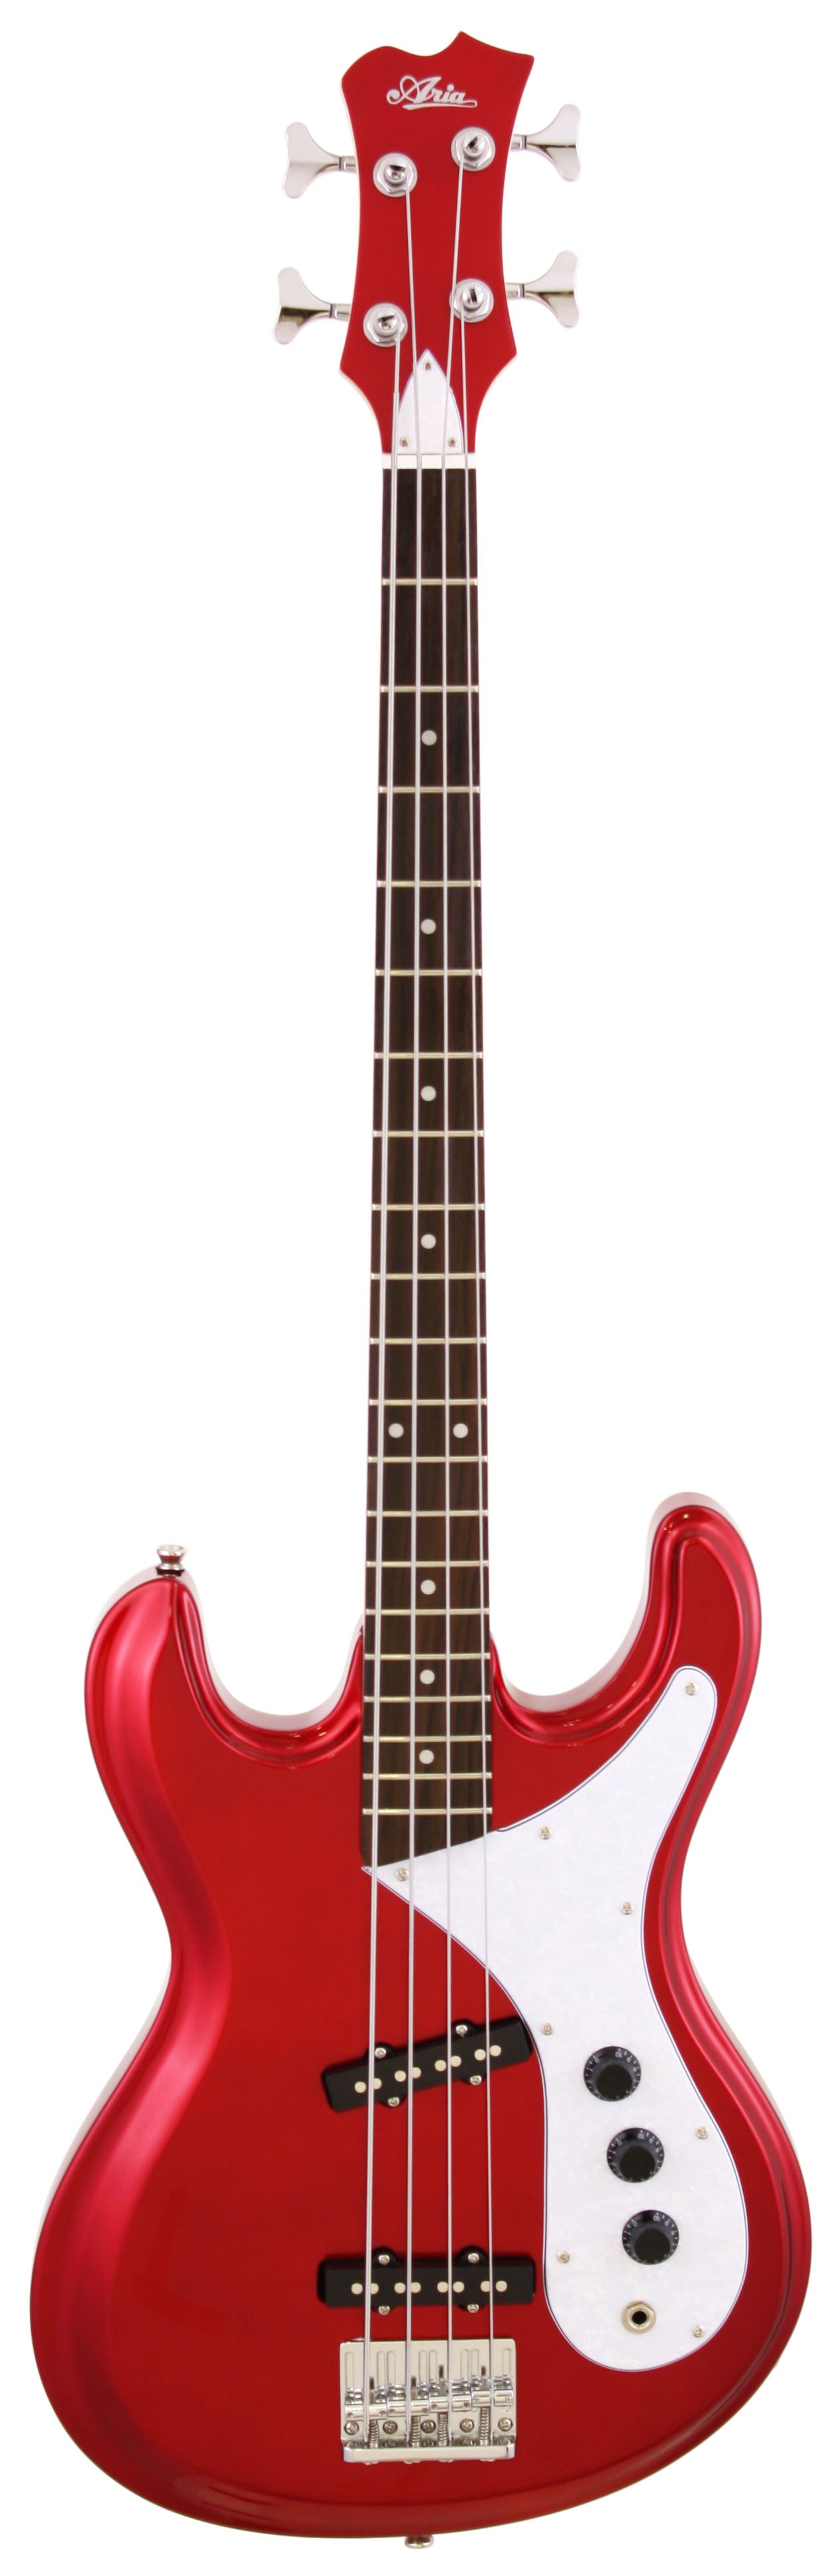 ARIA DMB-01 BASS IN OLD CANDY APPLE RED